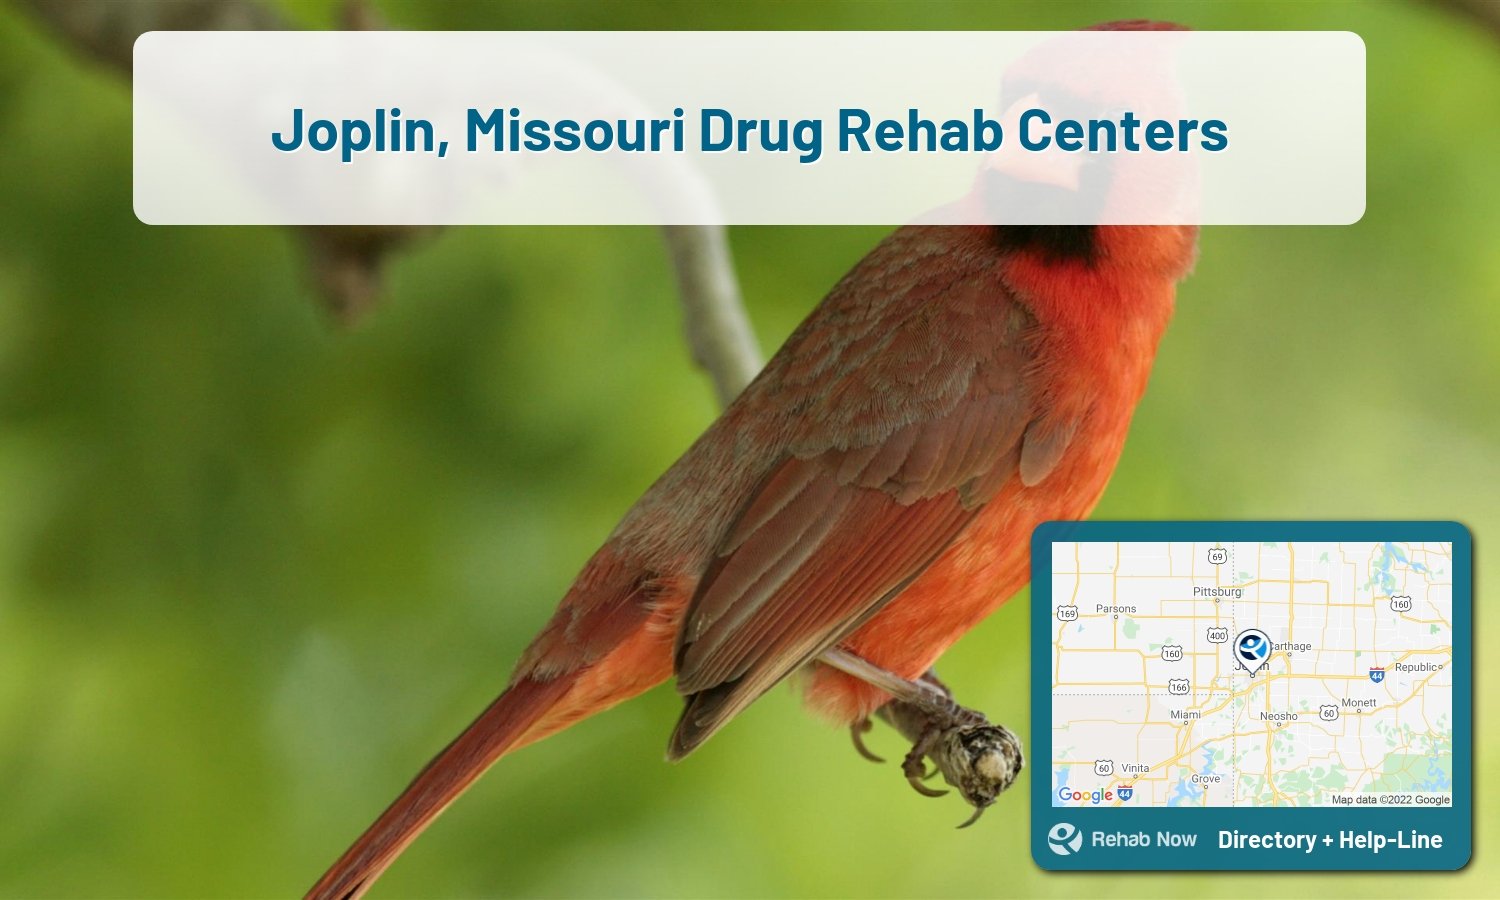 Joplin, MO Treatment Centers. Find drug rehab in Joplin, Missouri, or detox and treatment programs. Get the right help now!